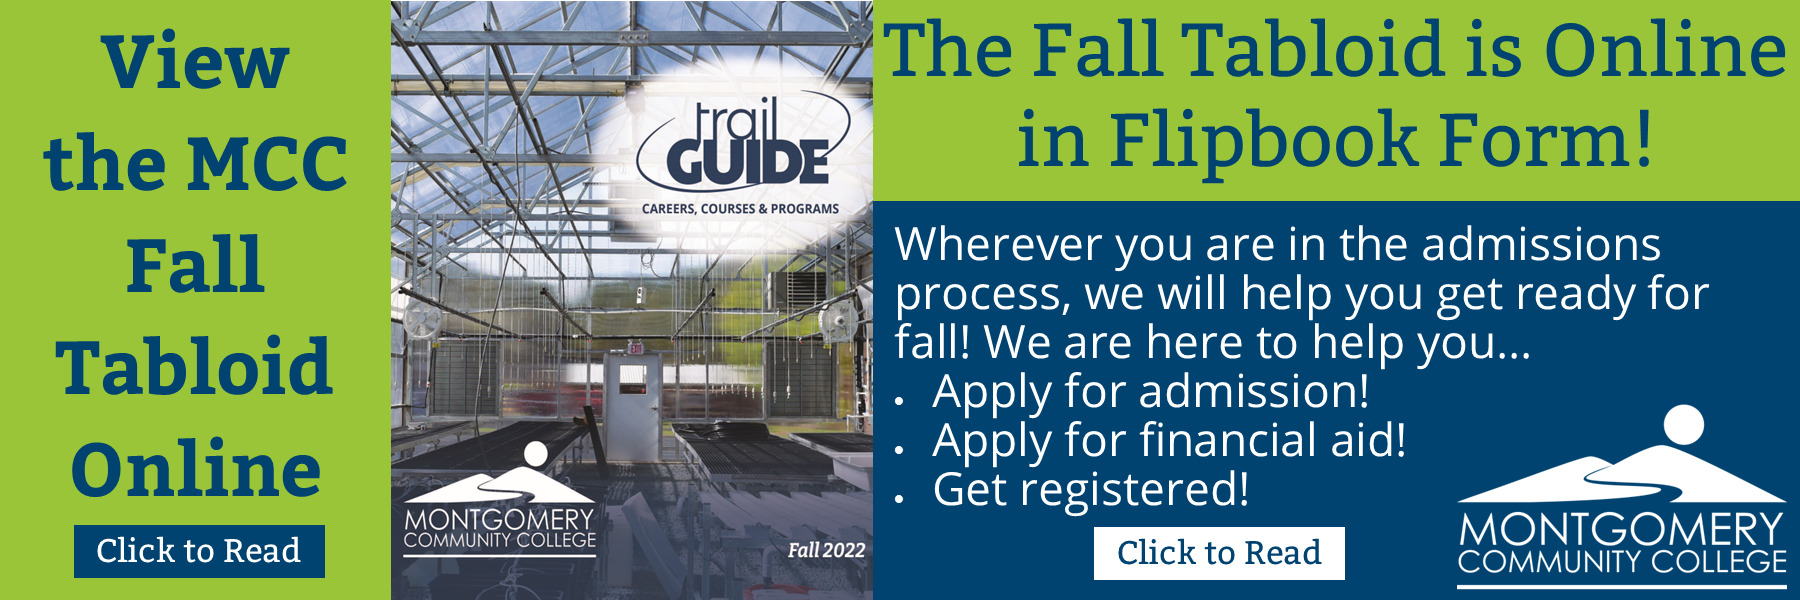 The Fall Tabloid is Online in Flipbook Form! Wherever you are in the admissions process, we will help you get ready for fall! We are here to help you... Apply for Admission! Apply for Financial aid! Get registered! View the MCC Fall Tabloid Online.  Click to read